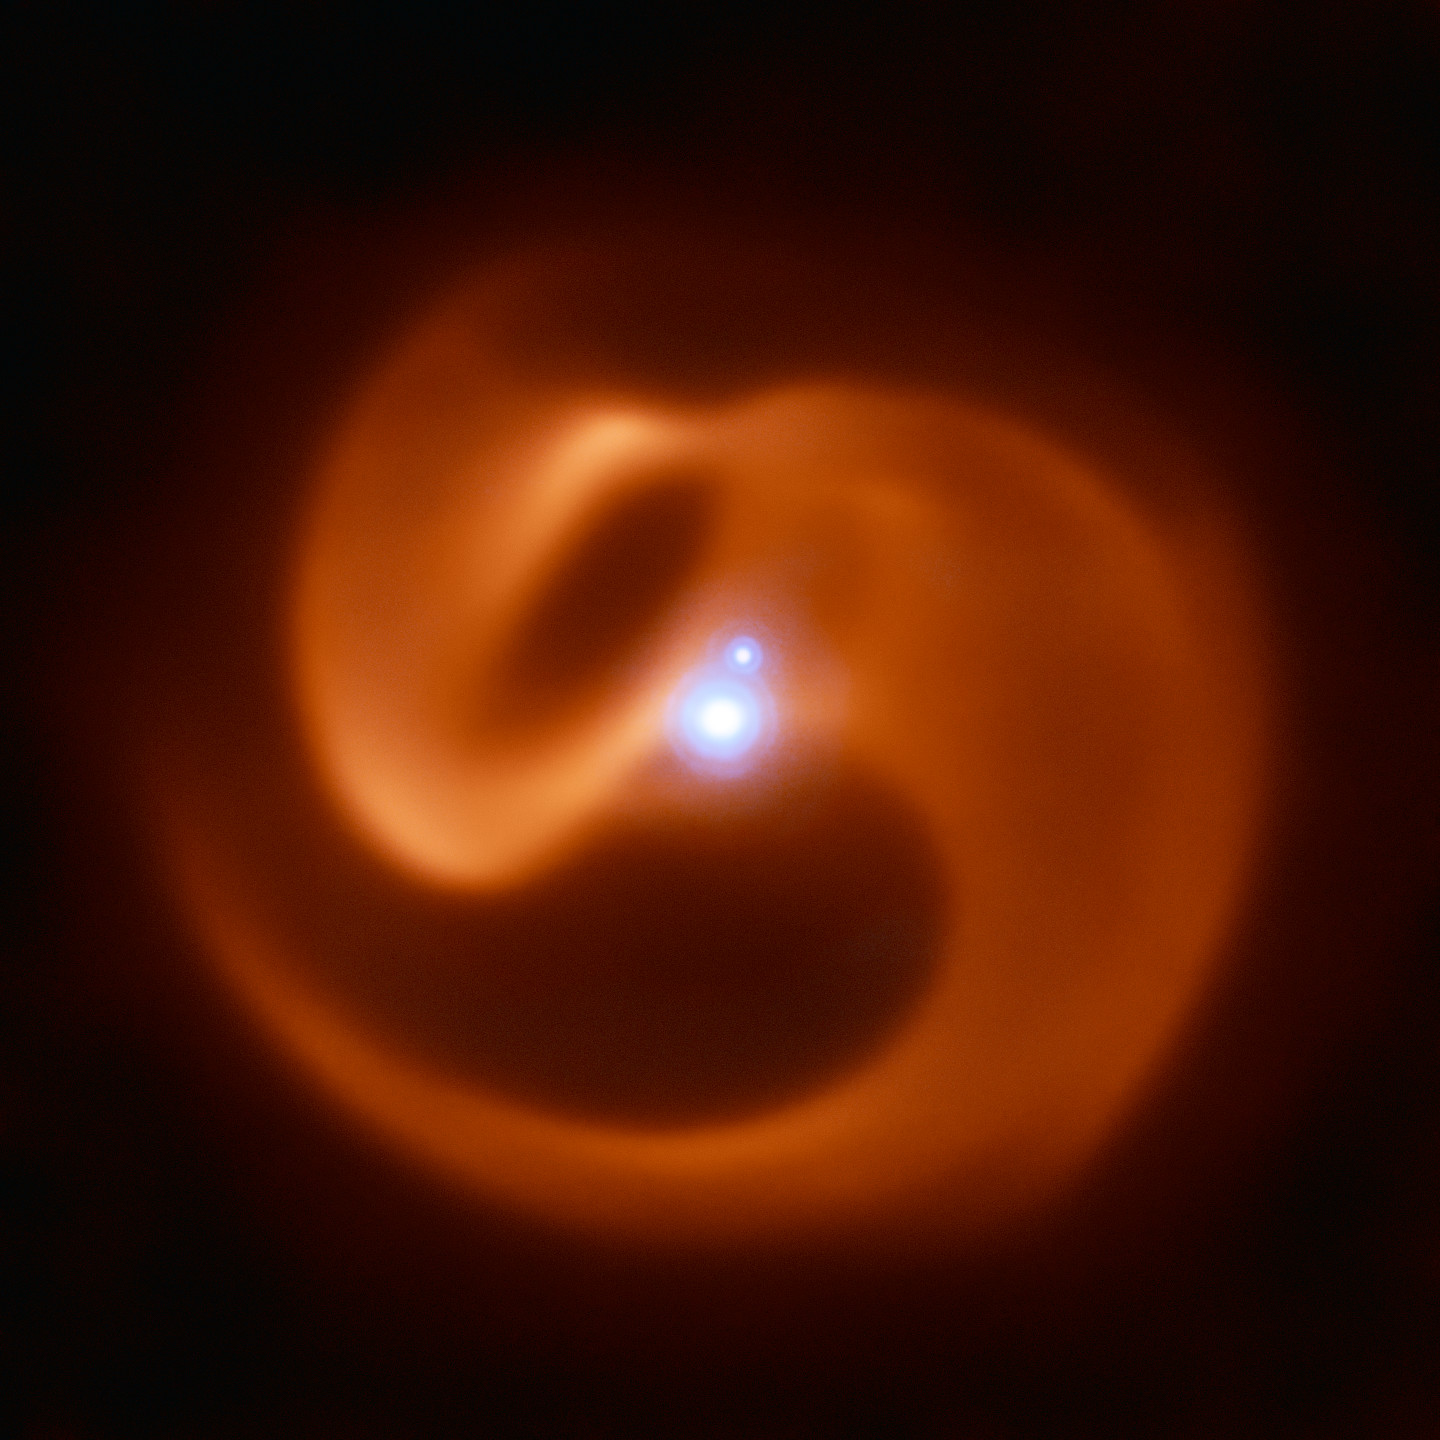 The VISIR instrument on ESO’s VLT captured this stunning image of a newly-discovered massive binary star system.